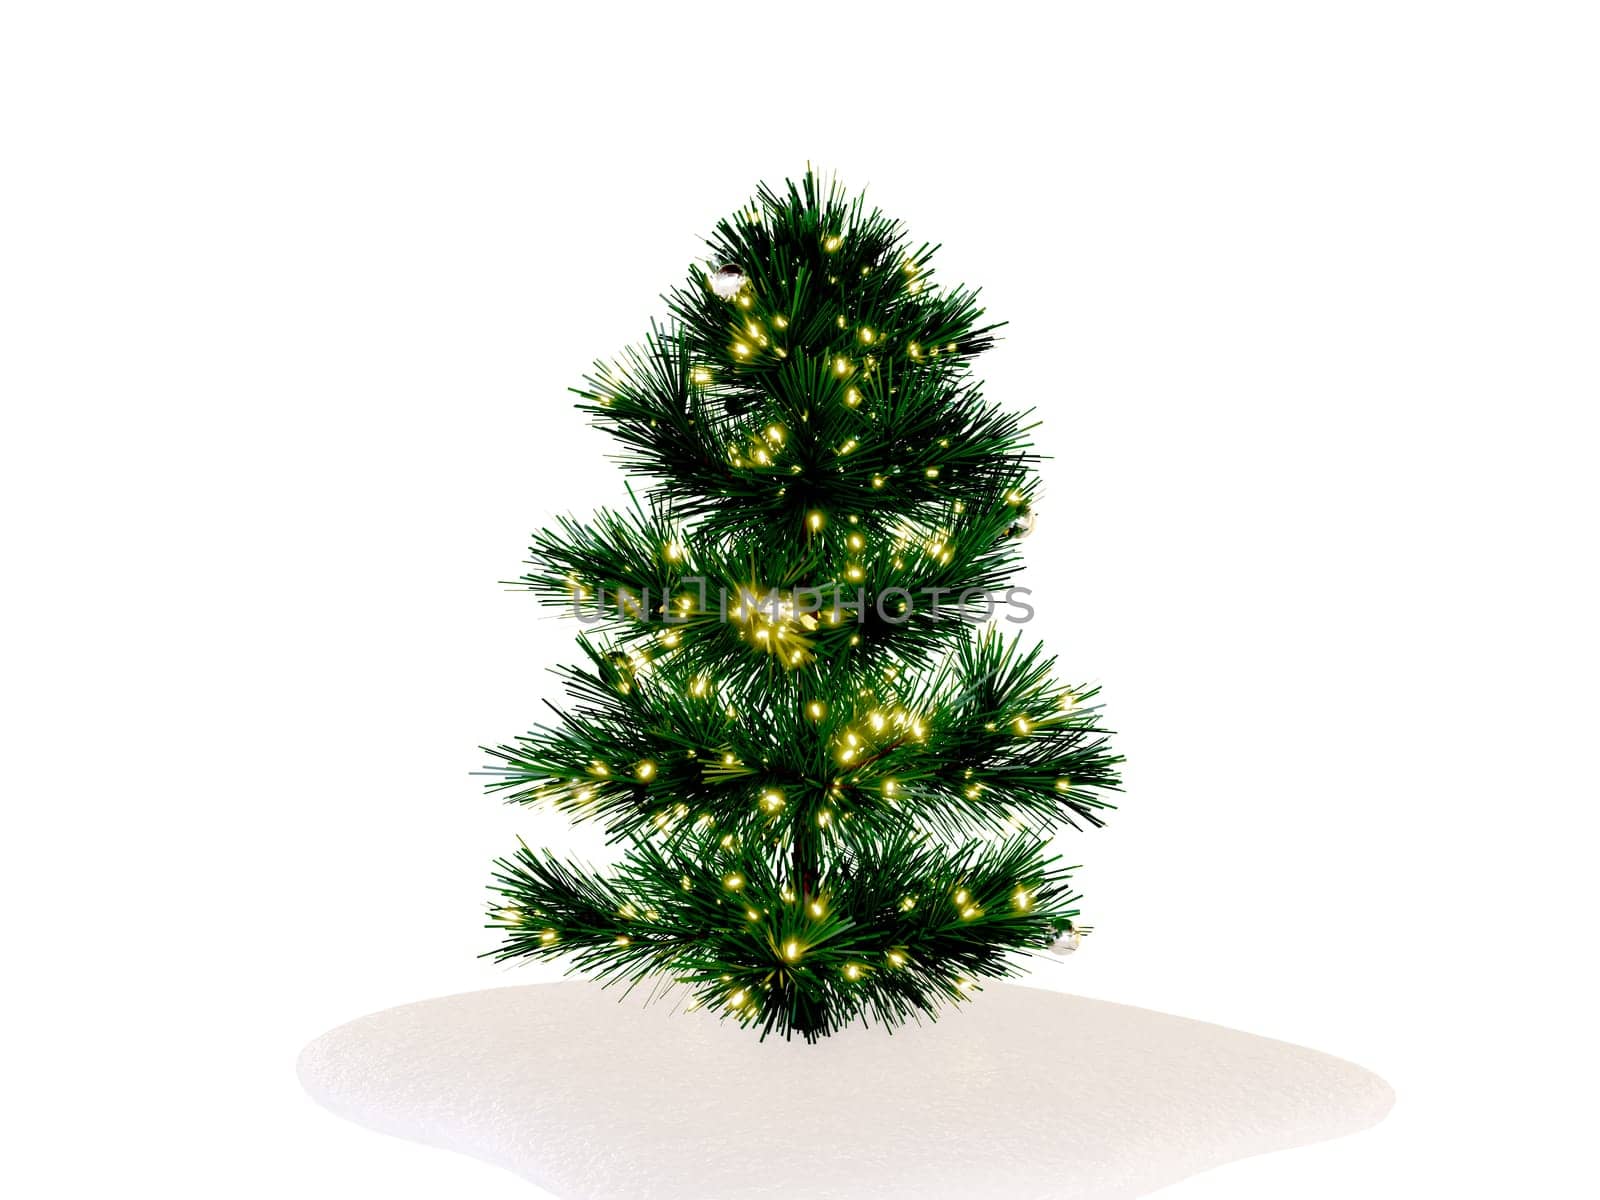 3D Christmas tree or pine tree 3D ready to decorate , isolated on white background. clipping path.